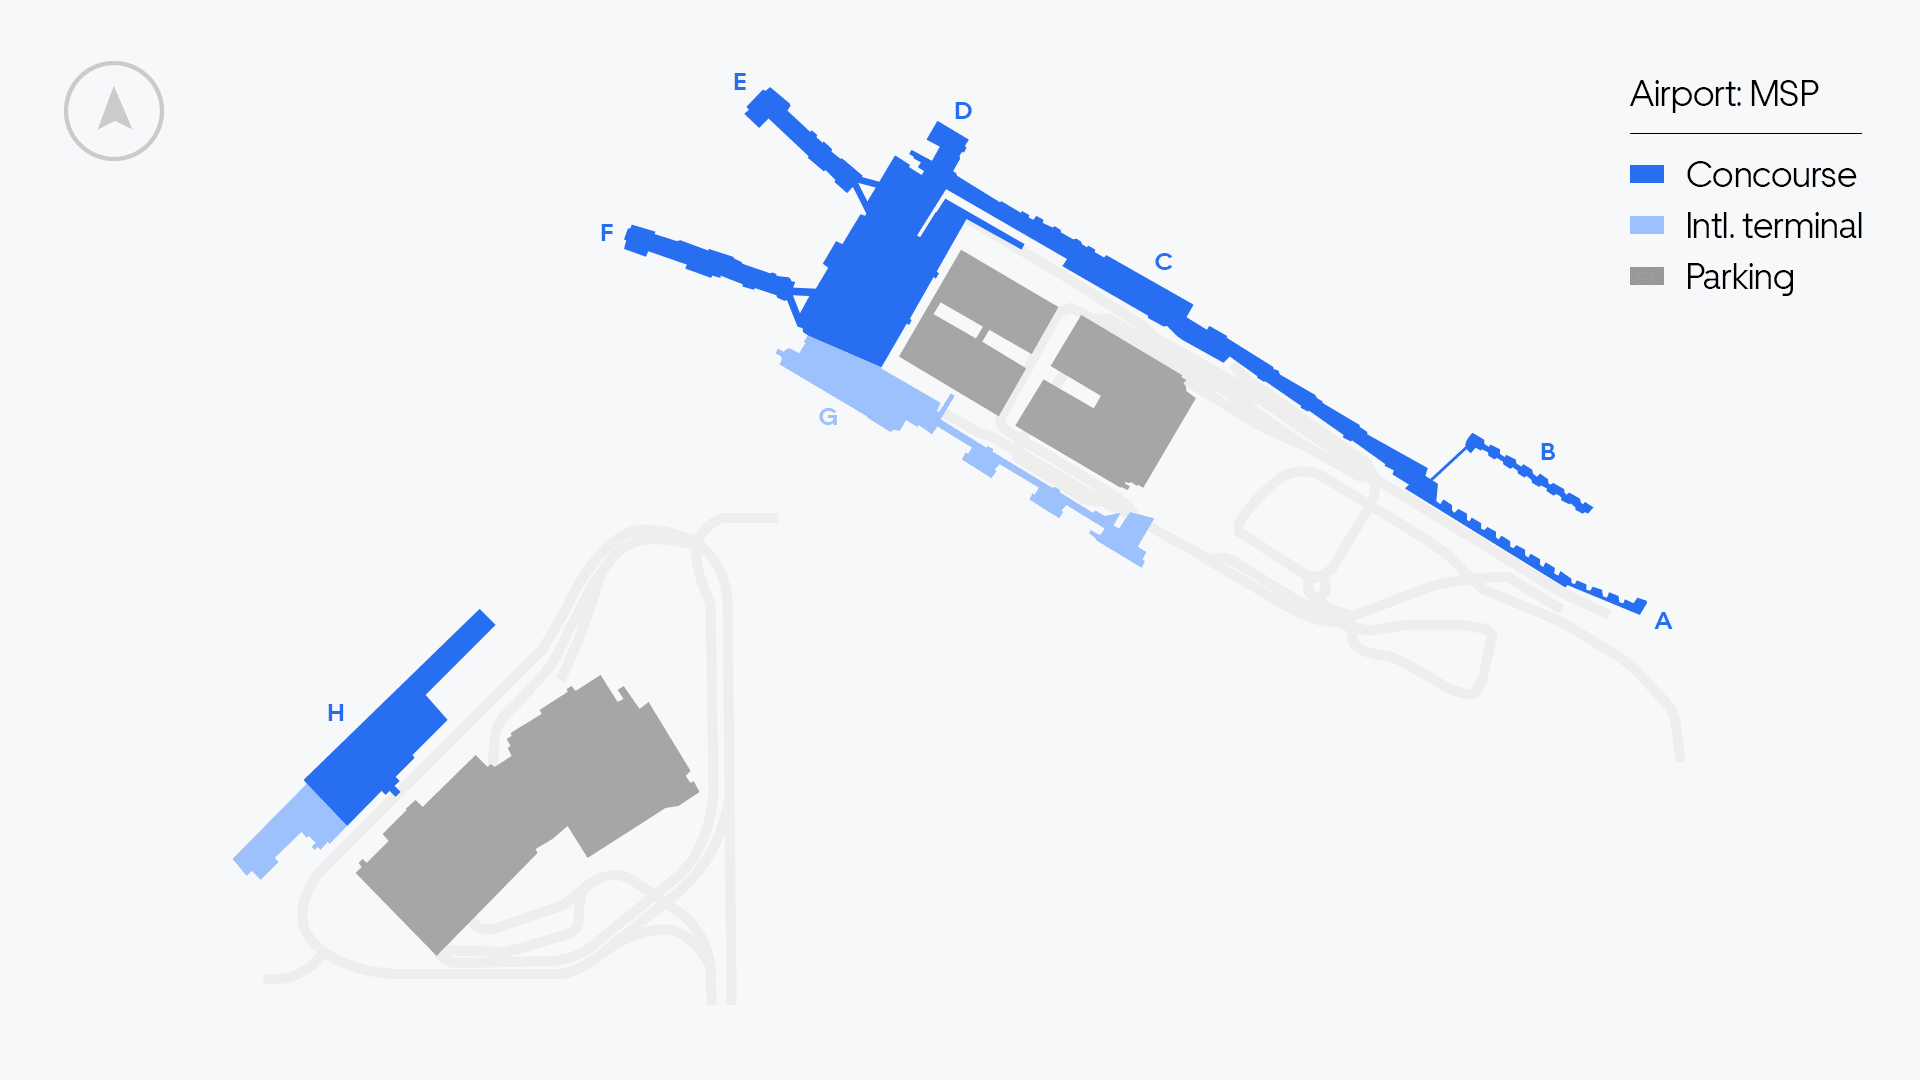 MSP Airport map